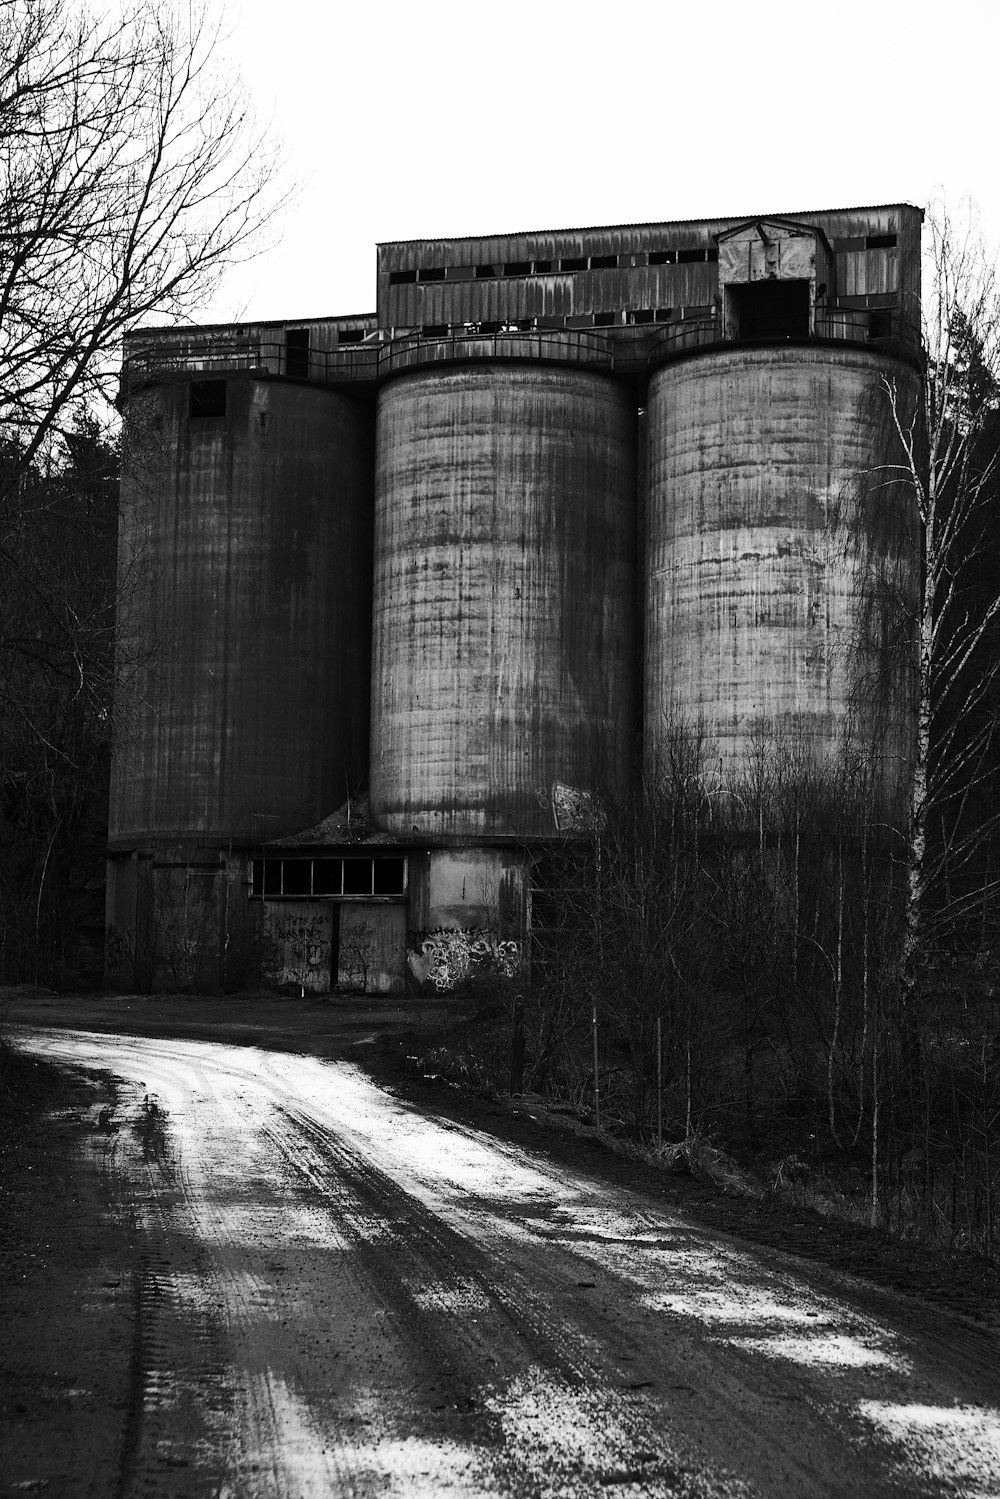 a black and white photo of an old grain silos